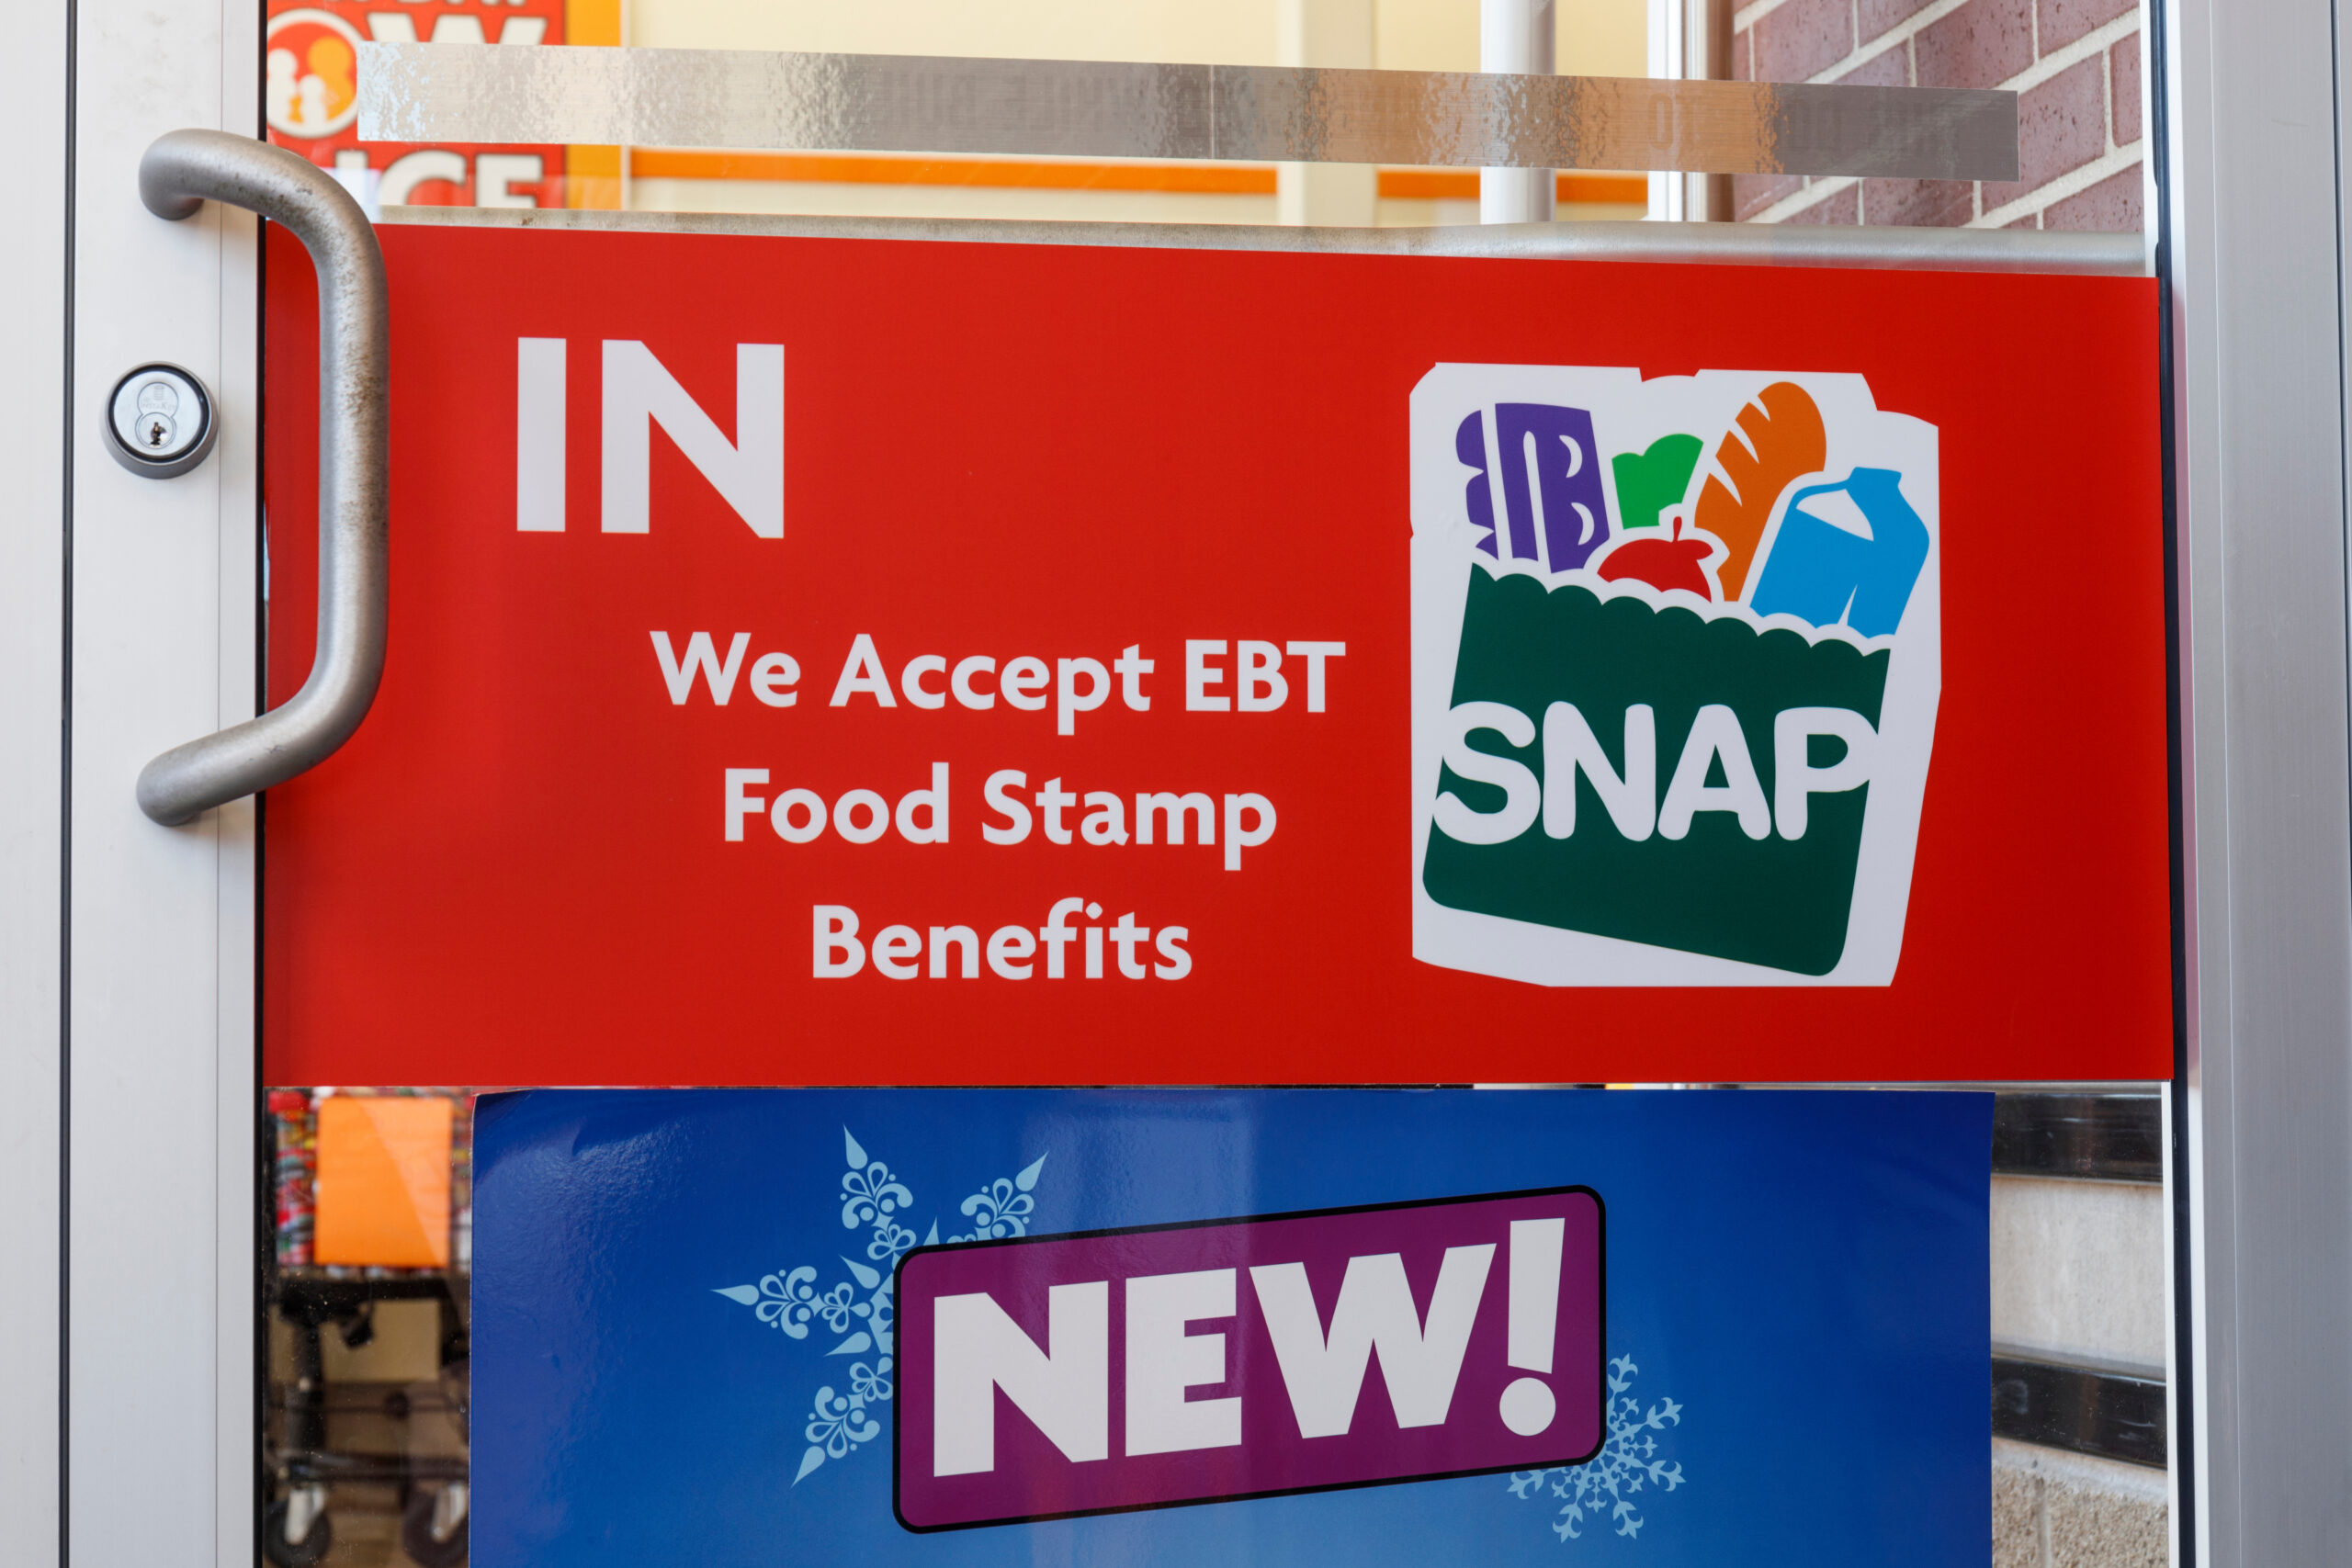 A red sign on a retailers glass door says: IN. We Accept EBT Food Stamp Benefits